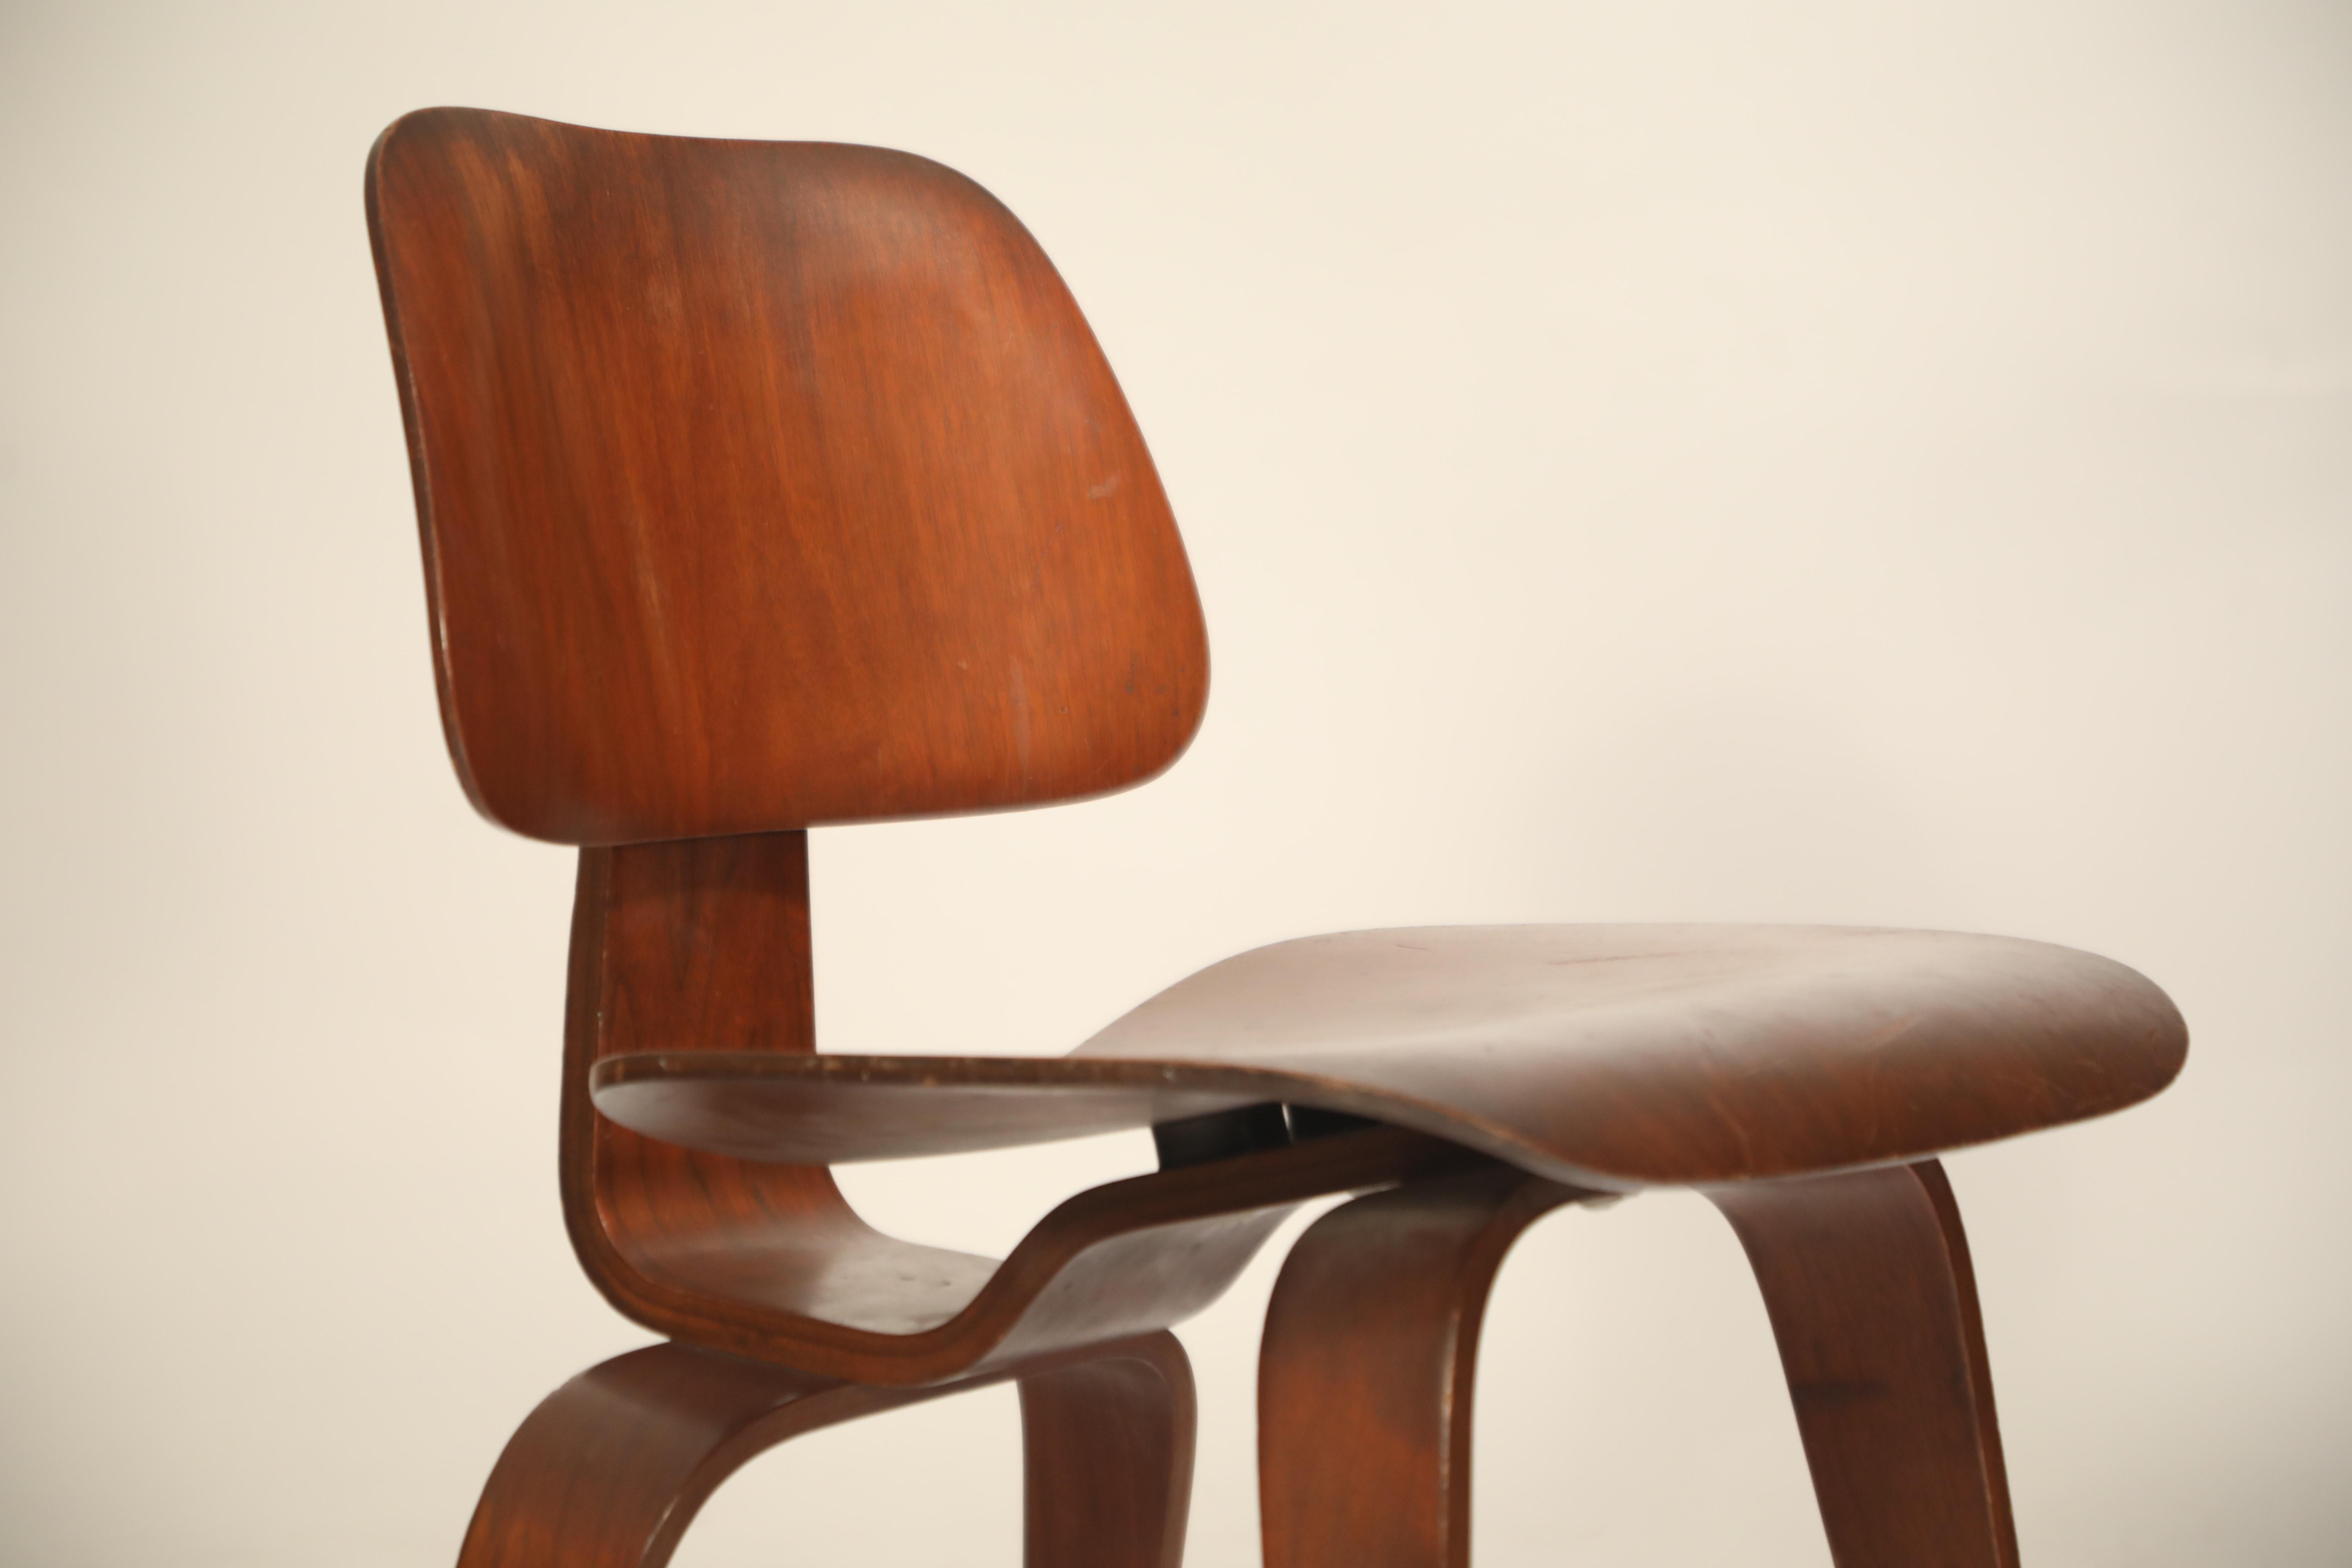 Walnut 1st Generation Charles Eames for Evans Products Company DCW Chair, 1947, Signed